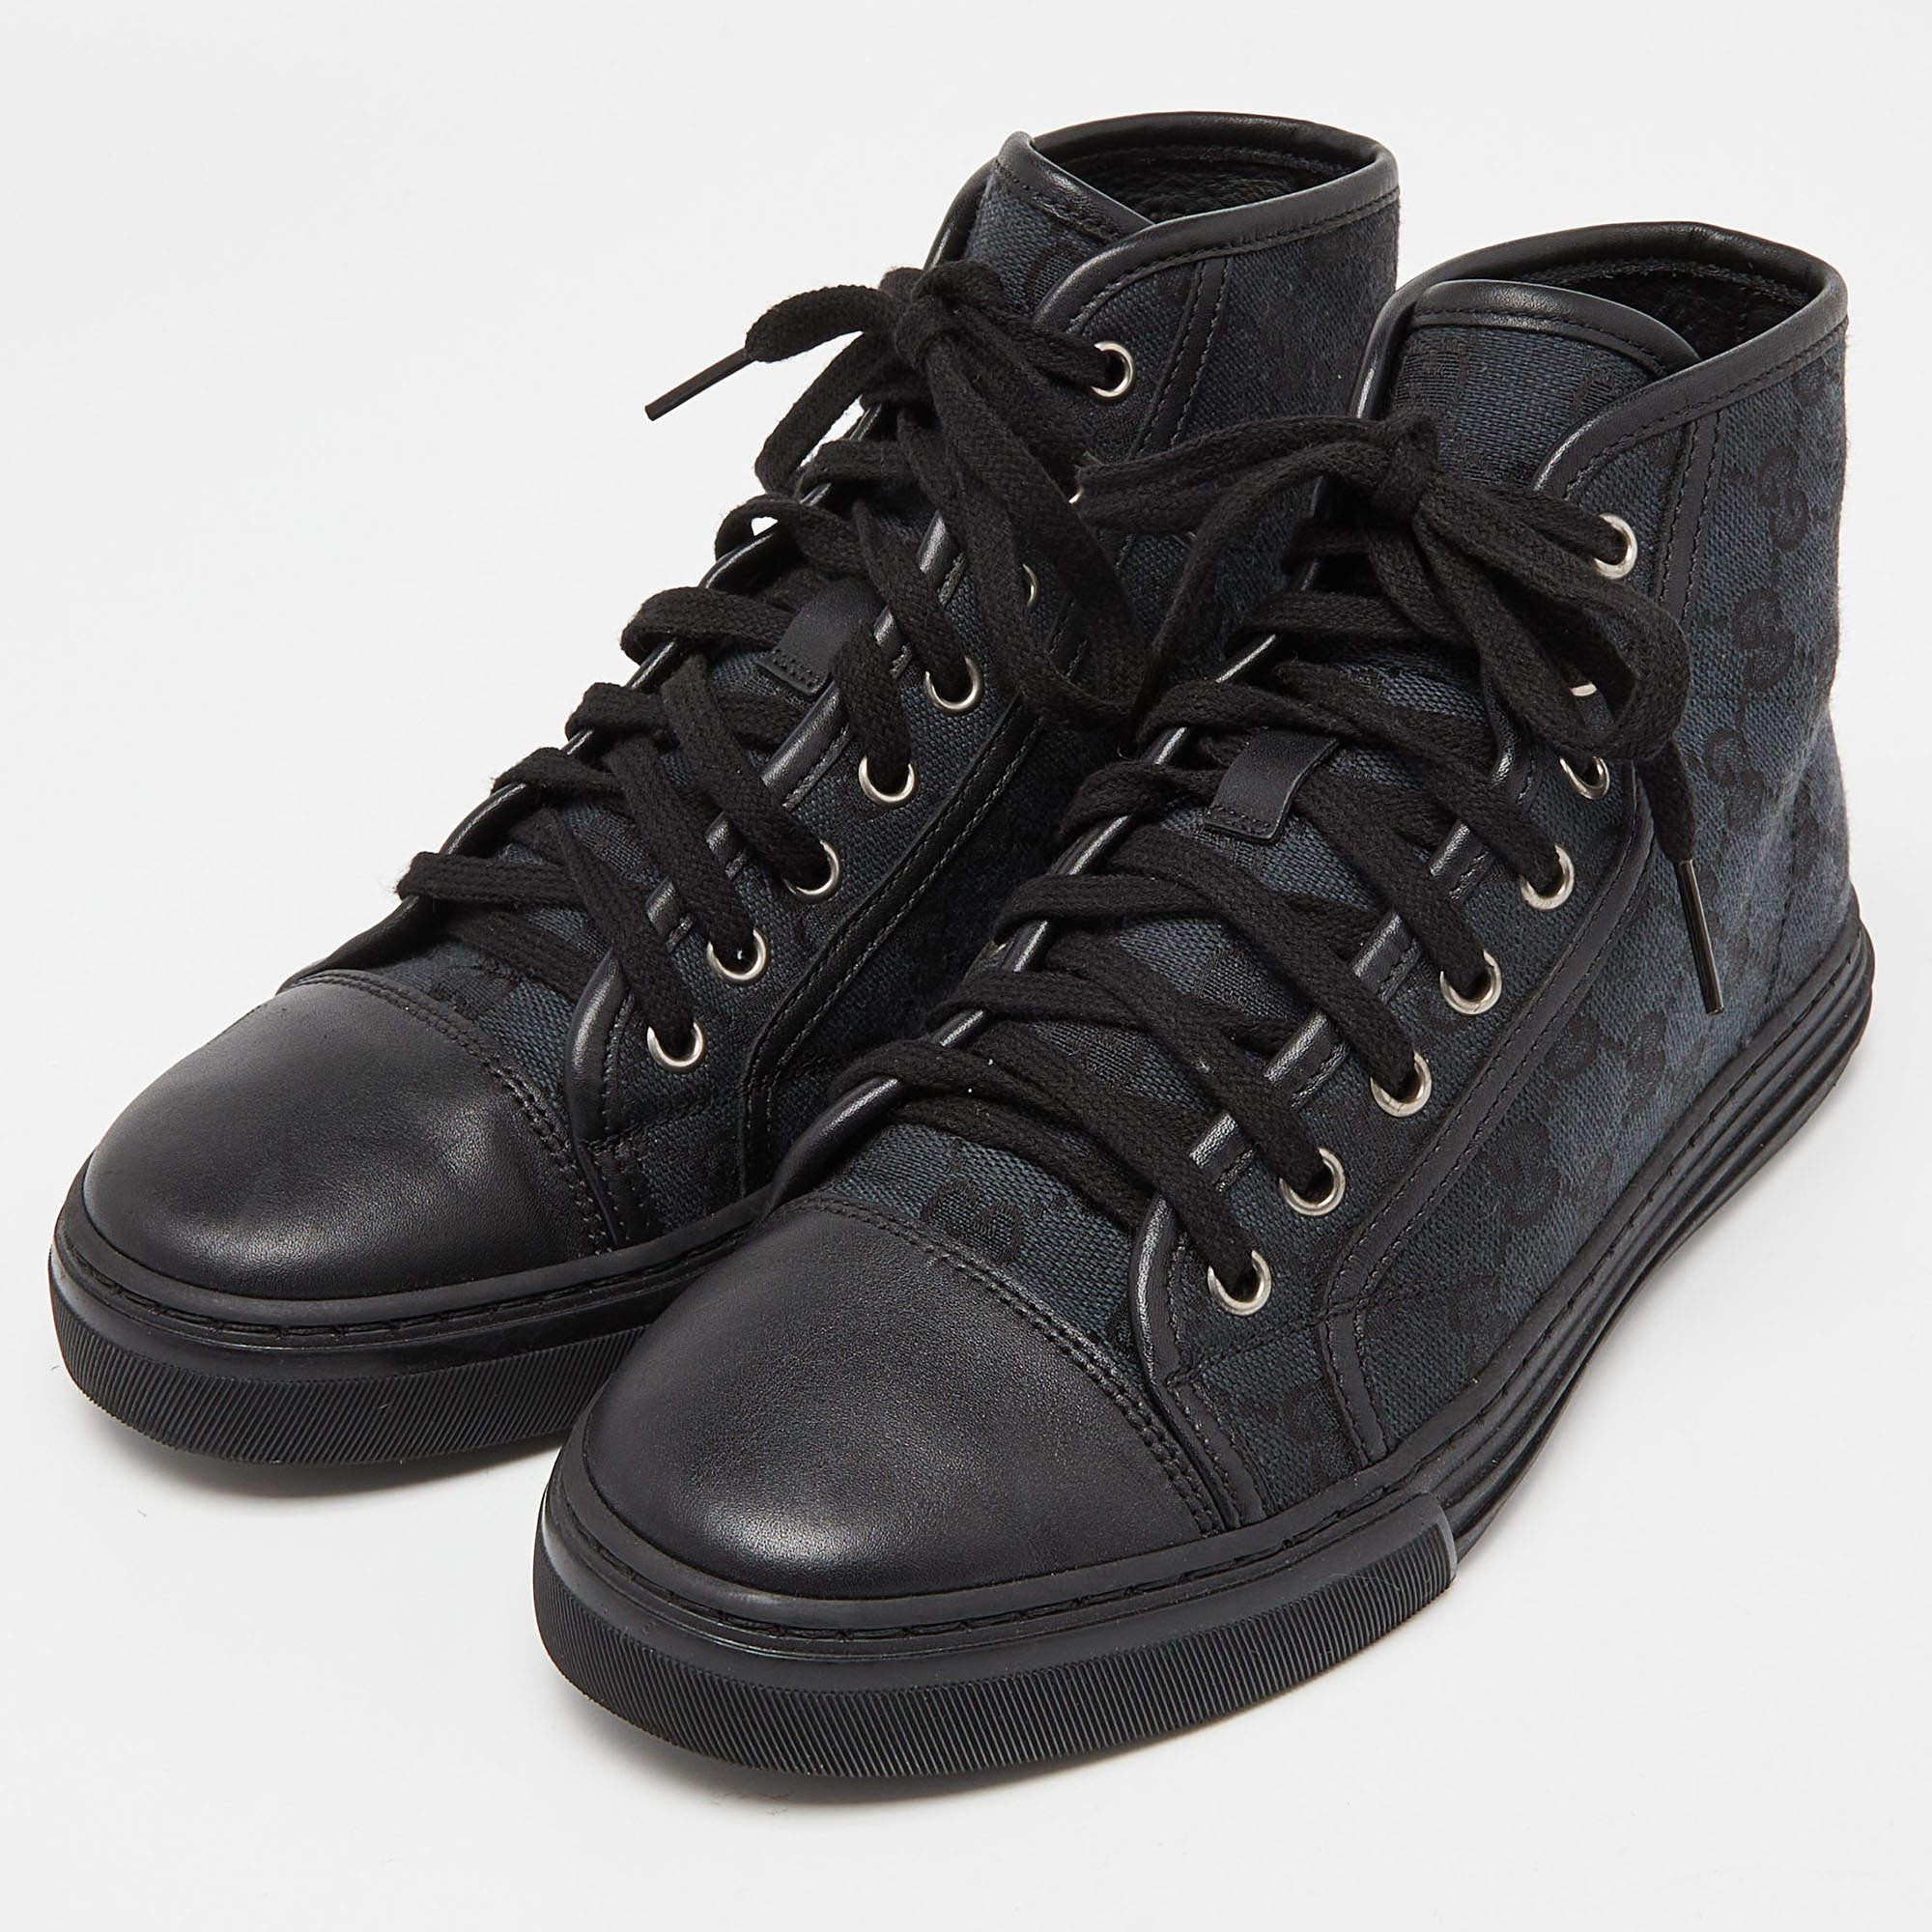 Gucci Black GG Canvas and Leather Brooklyn High Top Sneakers Size 37.5 In Good Condition For Sale In Dubai, Al Qouz 2